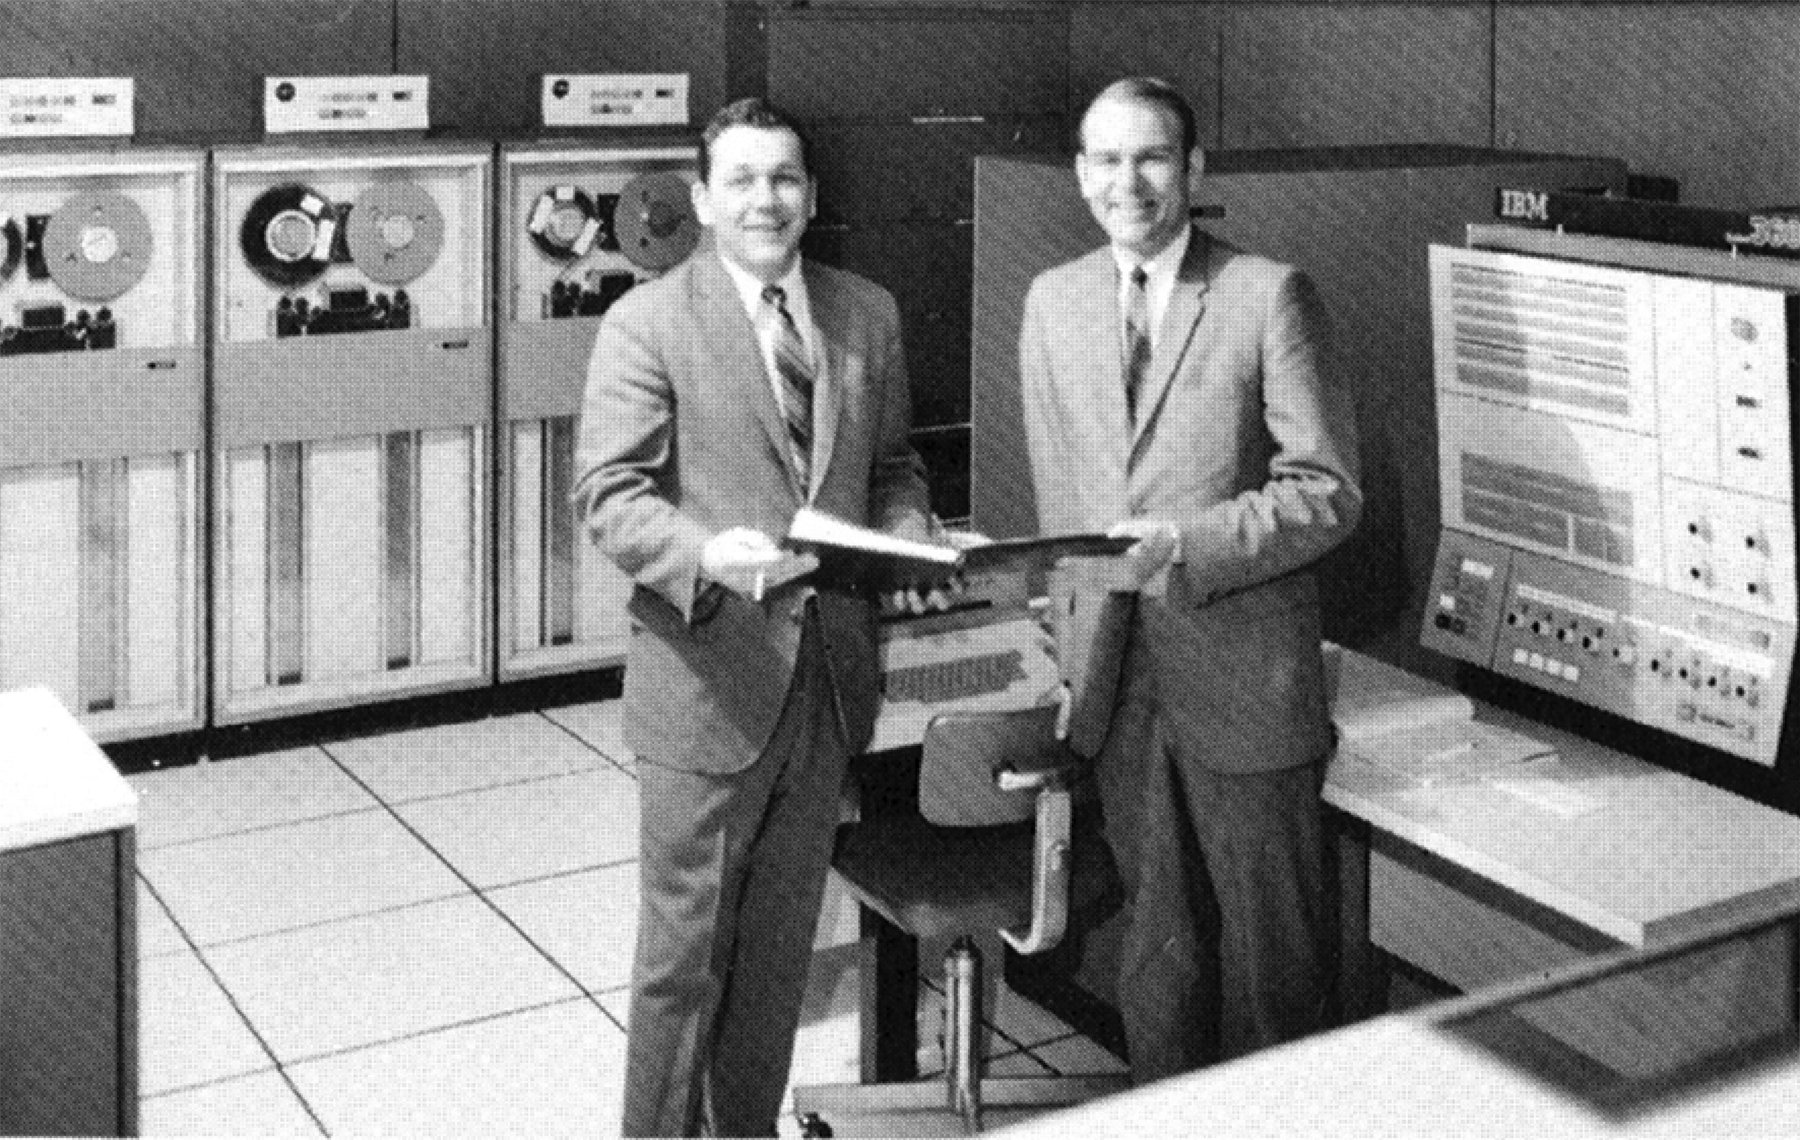 Illinois Mutual employees stand next to the Company’s first mainframe computer.